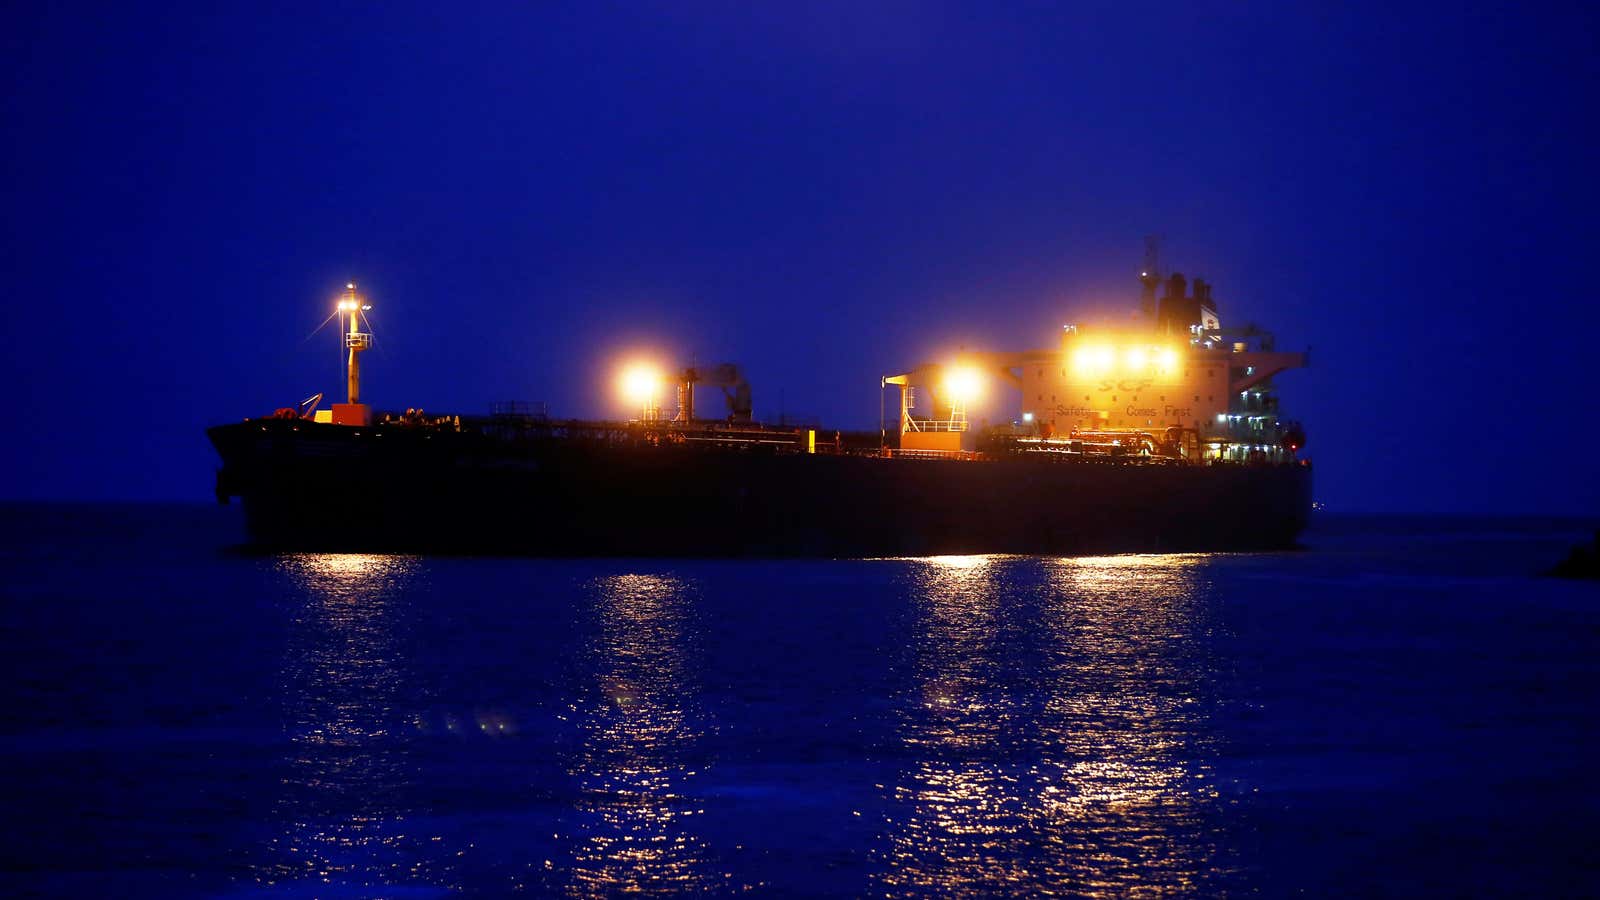 An oil tanker arrives at the port of Klaipeda in Lithuania.